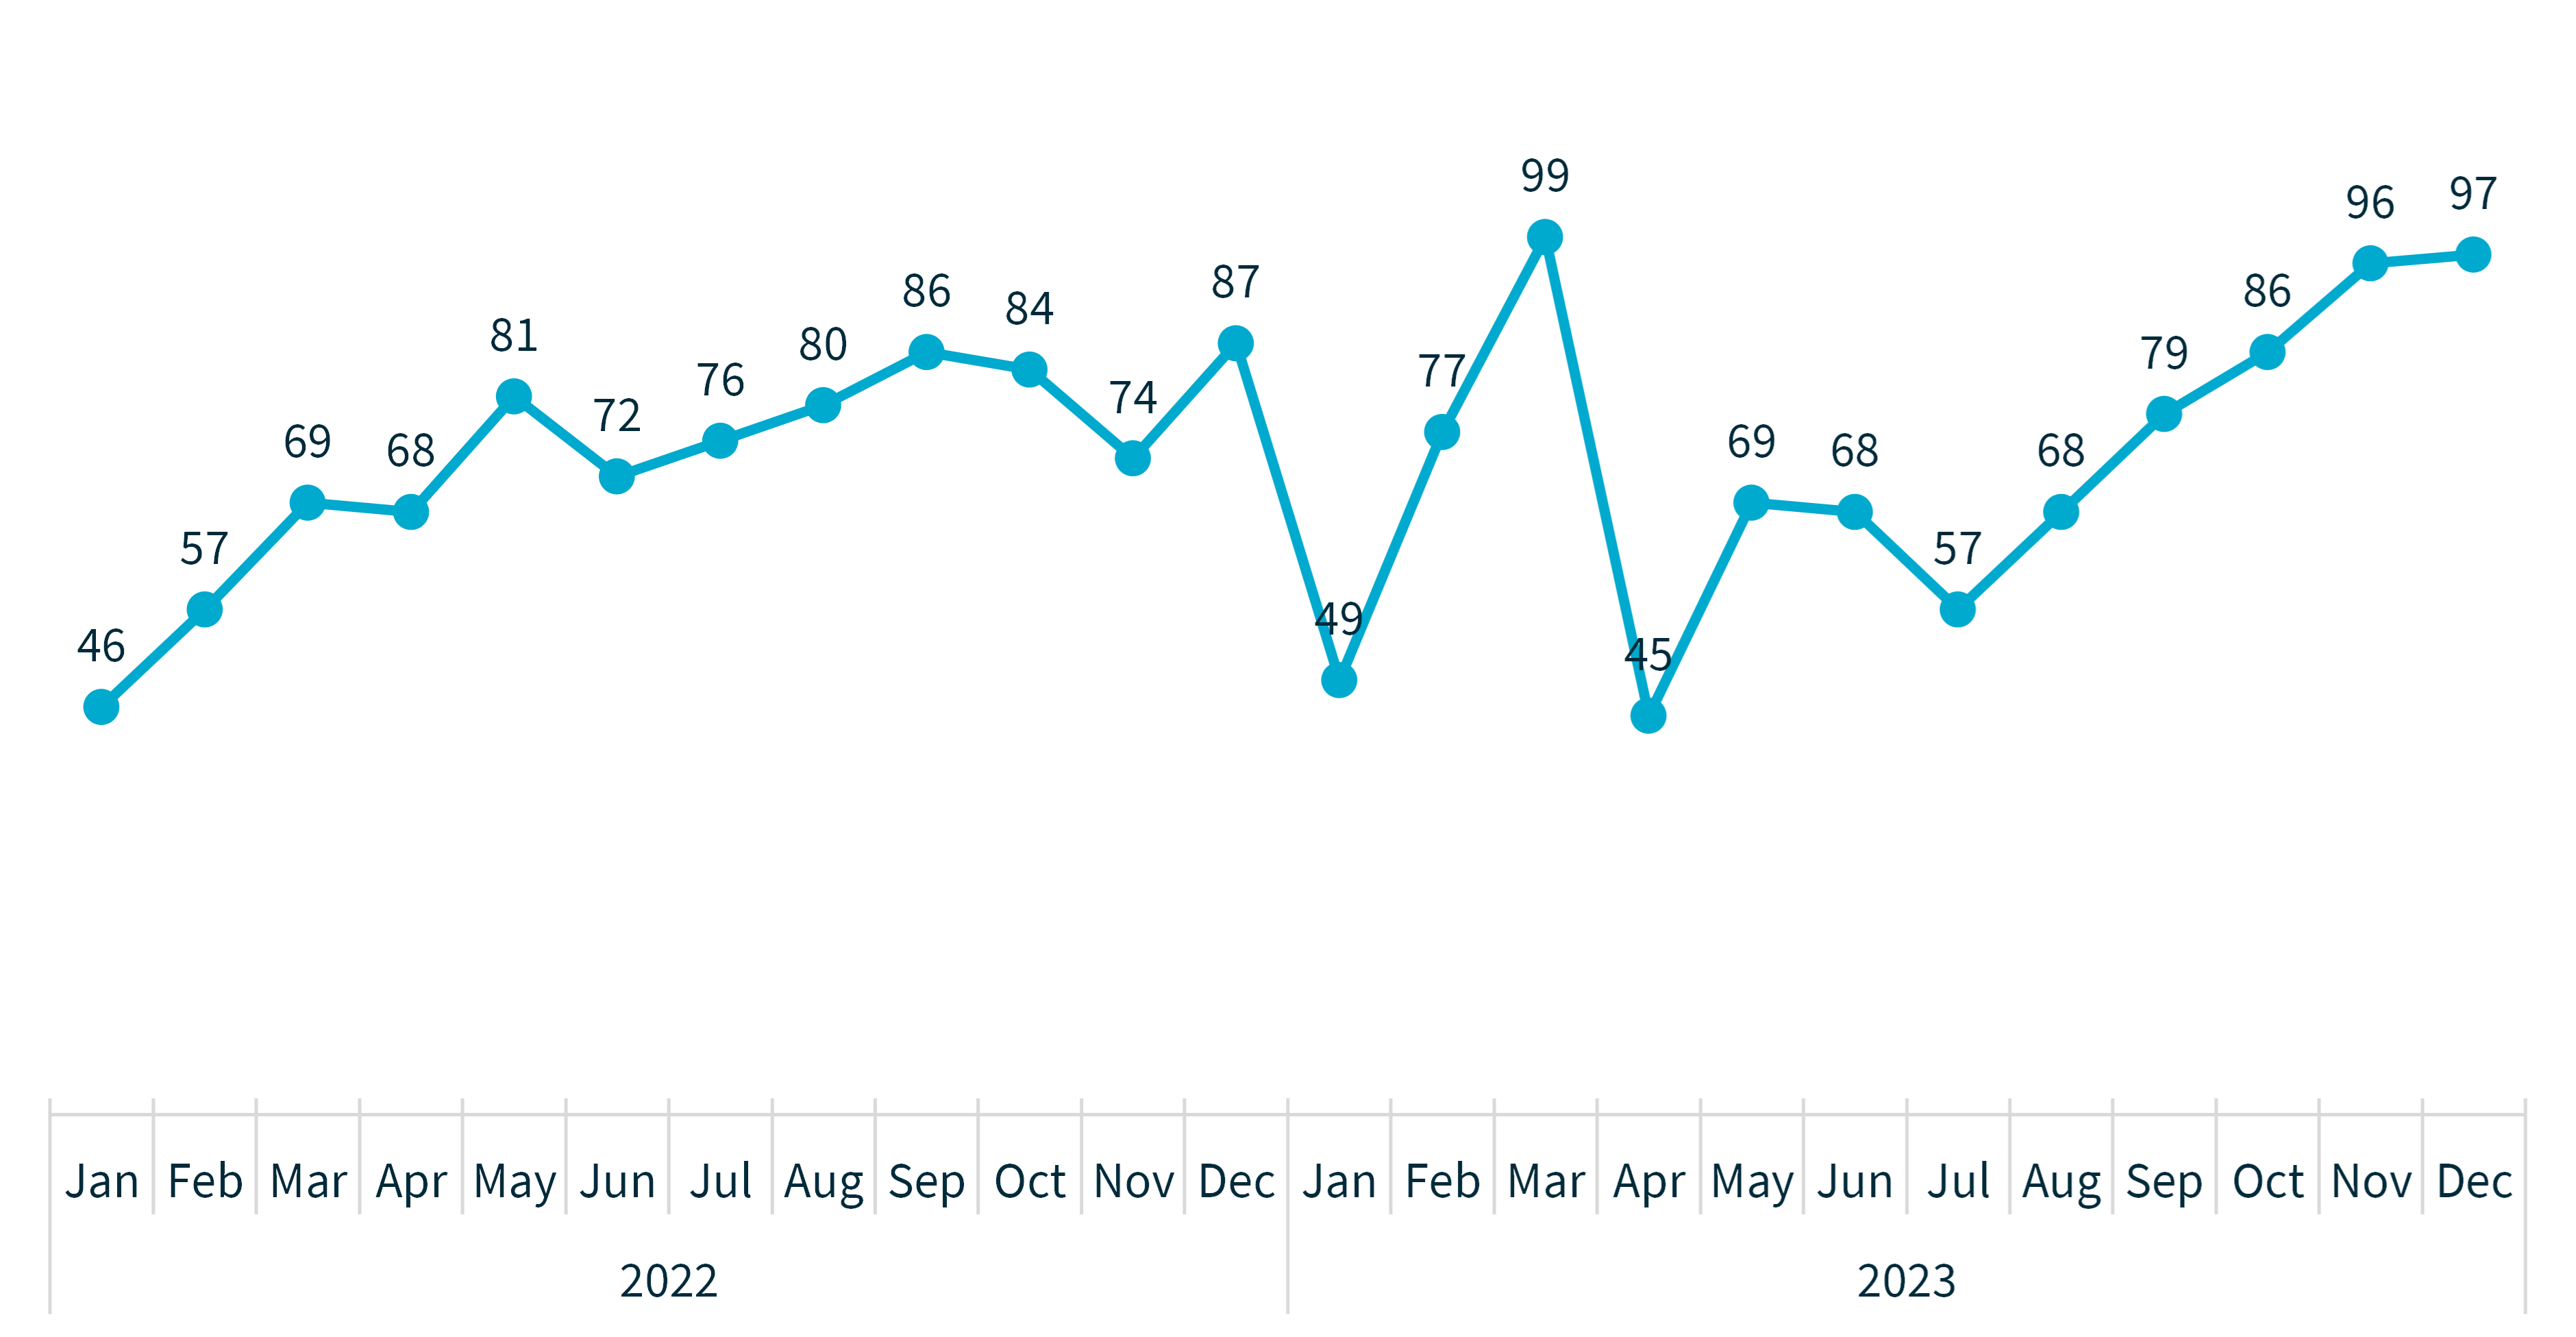 Chart 1 - Notifications received by month from January 2022 to December 2023